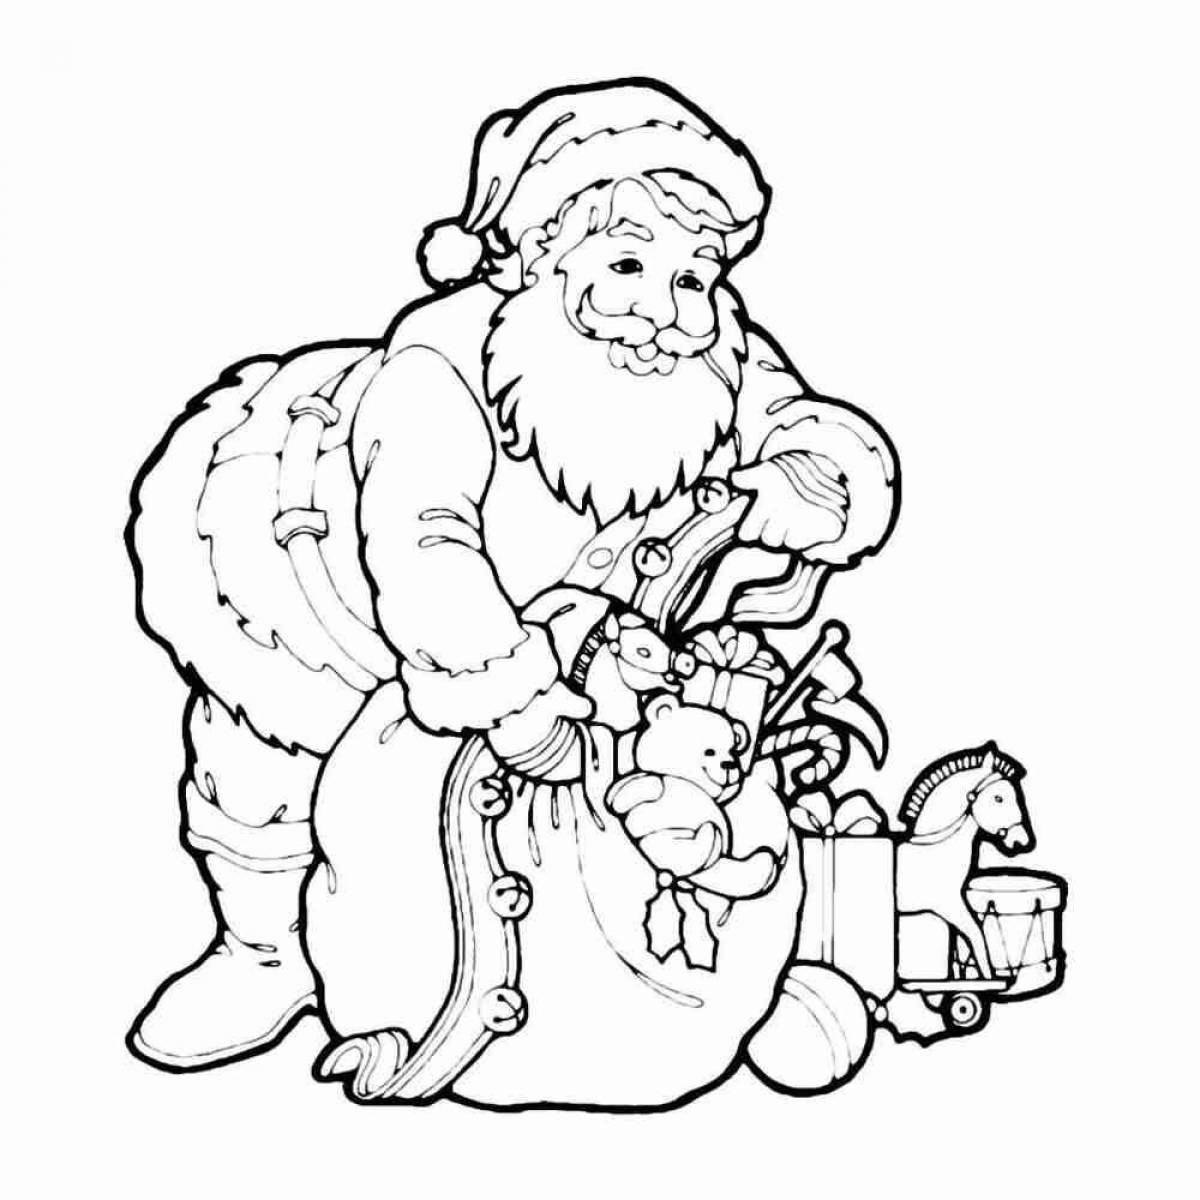 Coloring page energetic Santa Claus with a bag